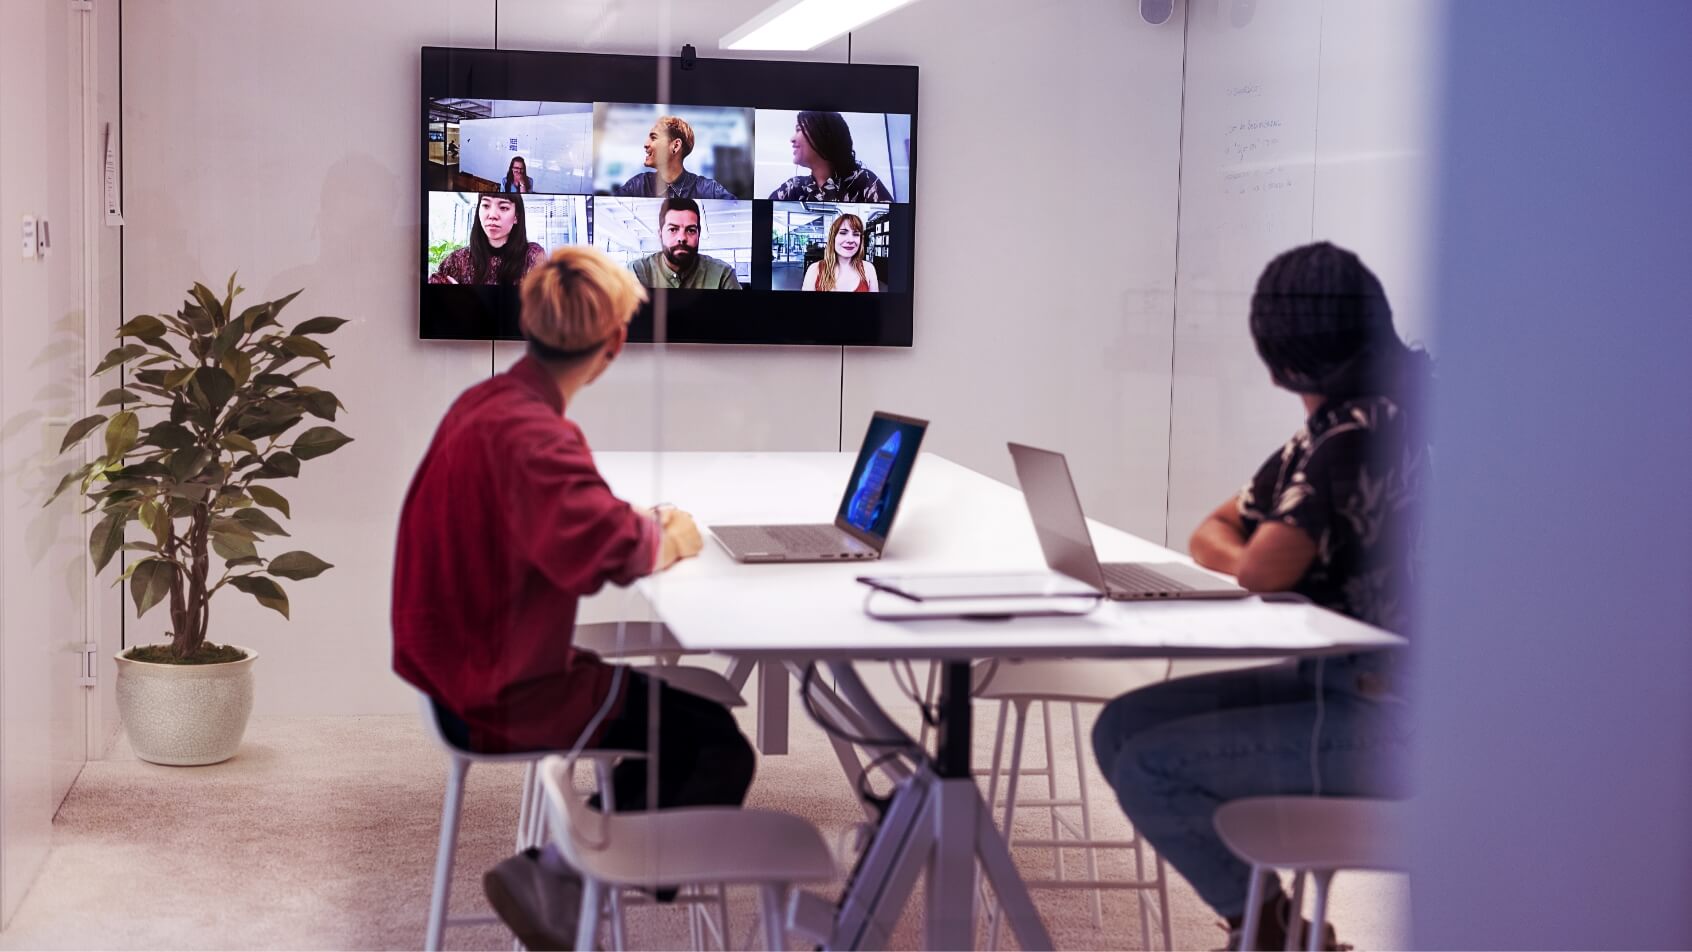 Two people in a meeting room having a video conference with six other participants